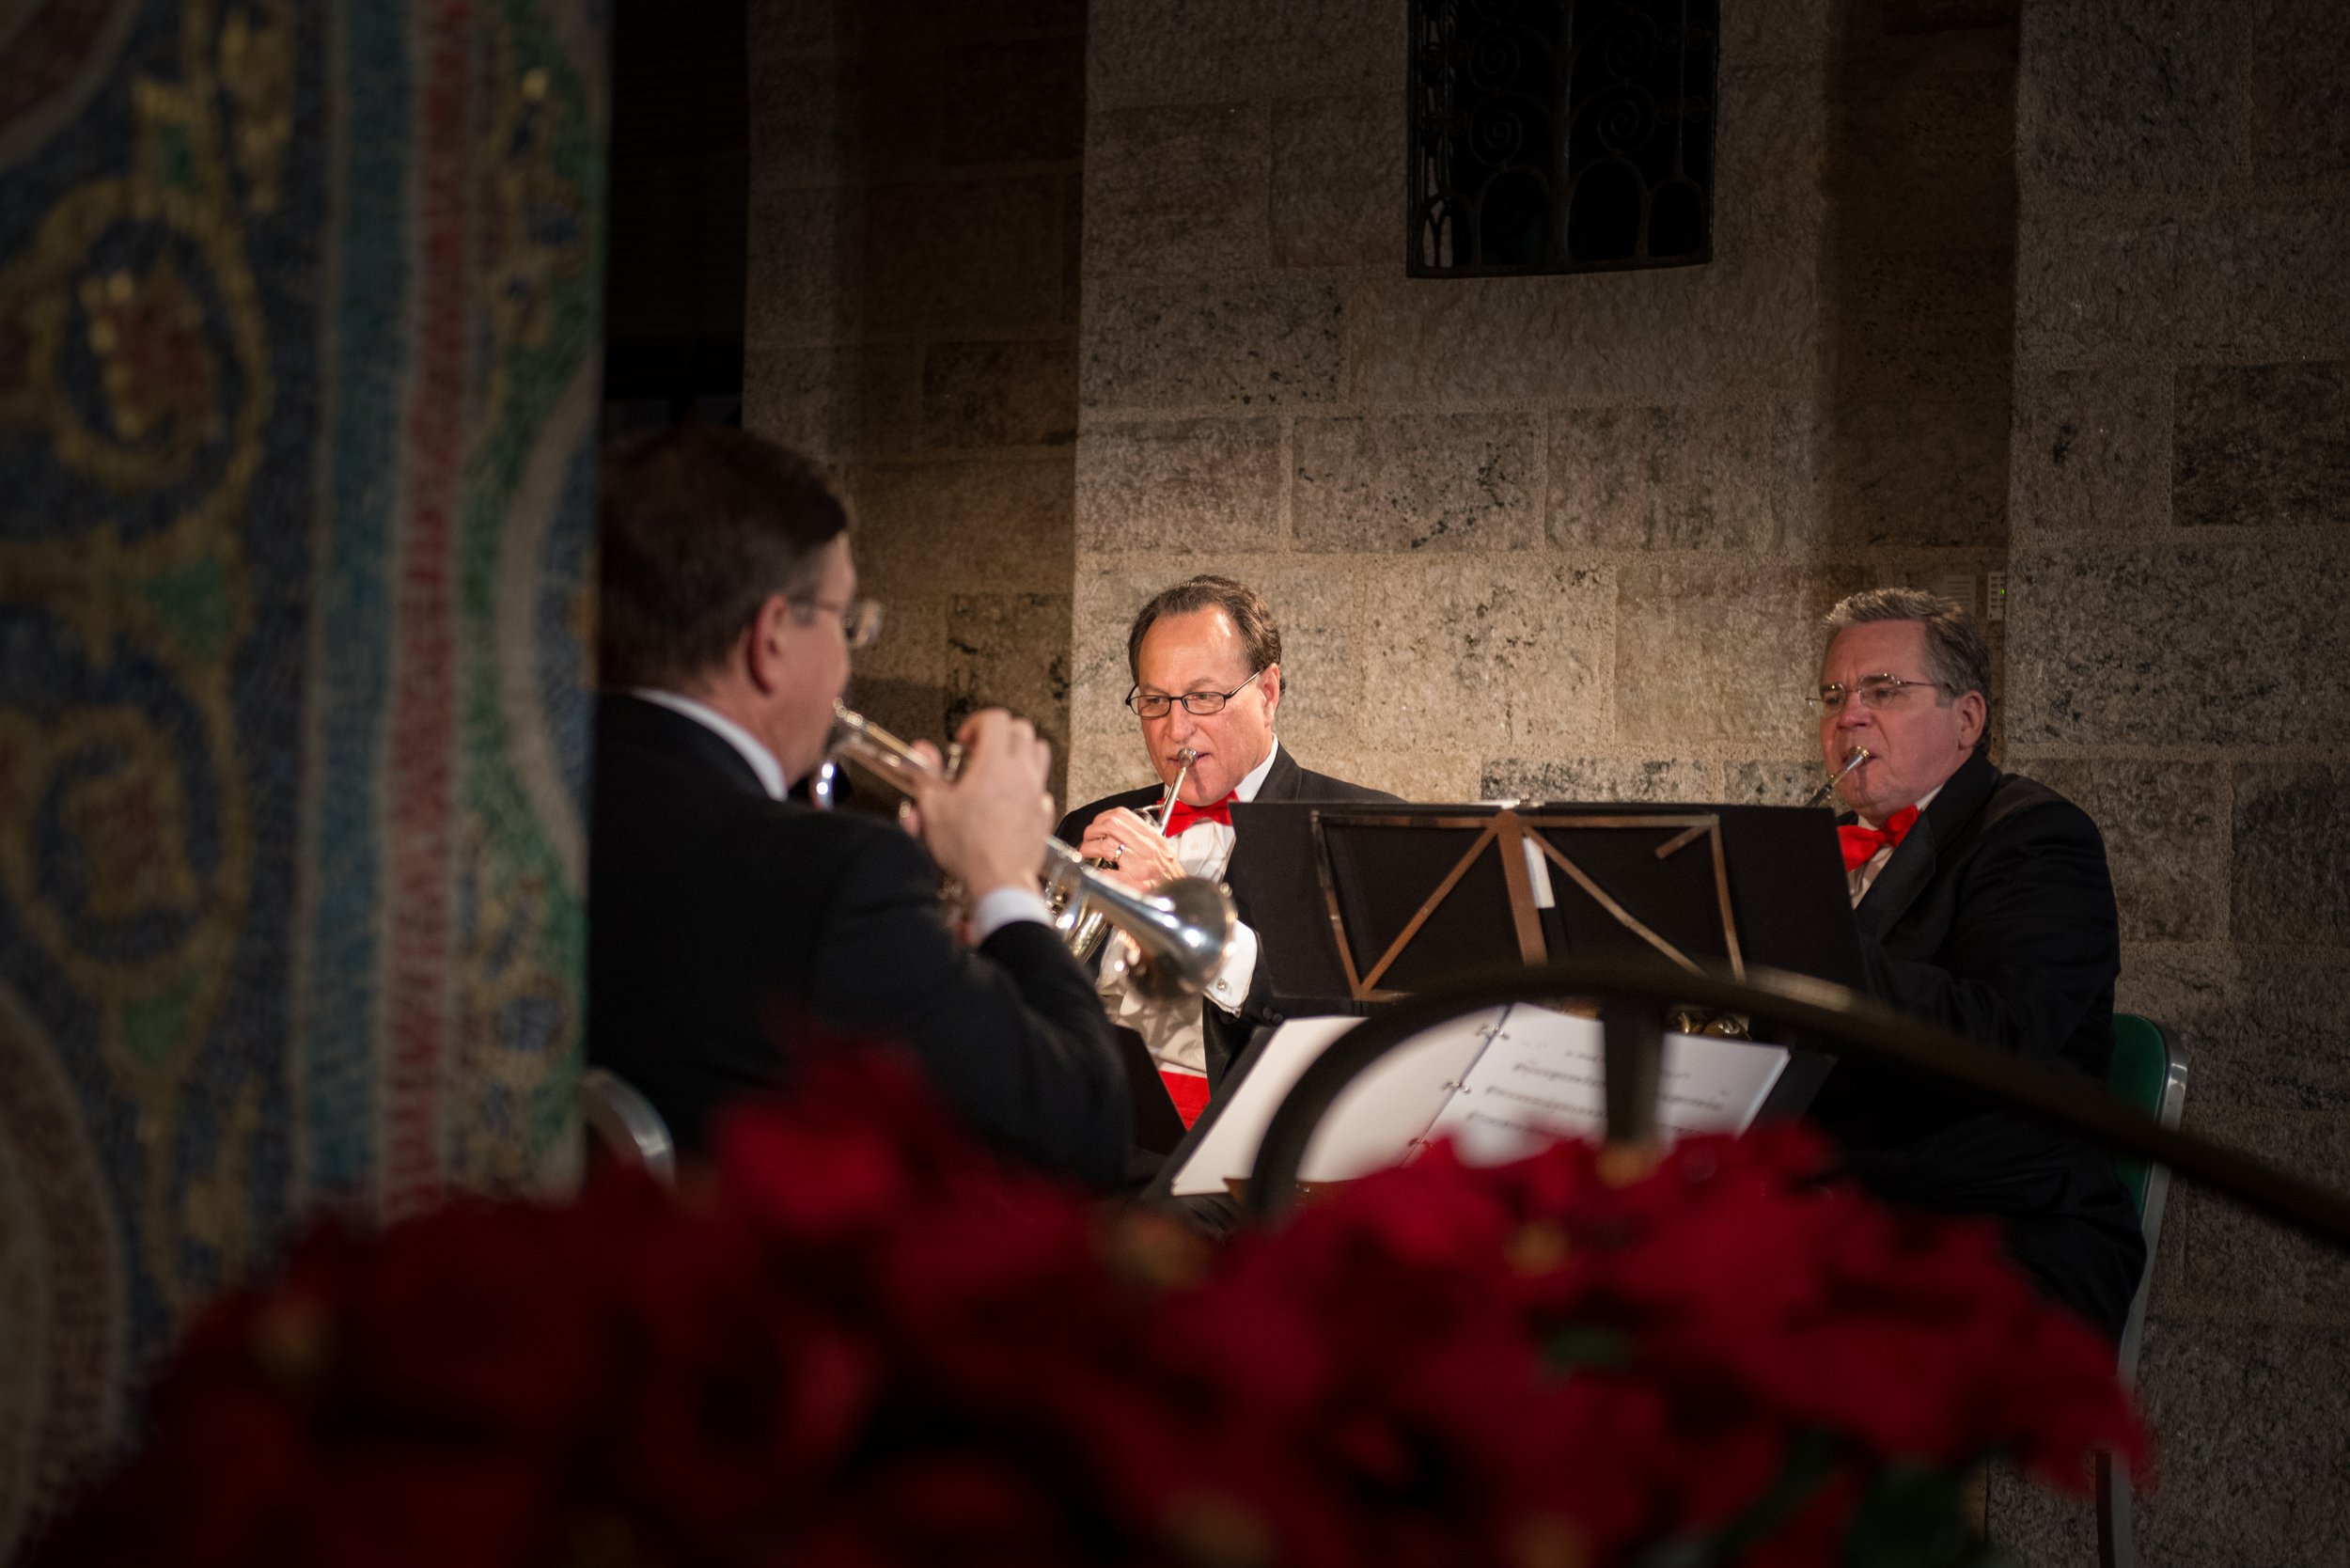  Three horn players perform during Glencairn Museum's annual Christmas Sing concert. Their red bowties complement the red poinsettias in the foreground. 